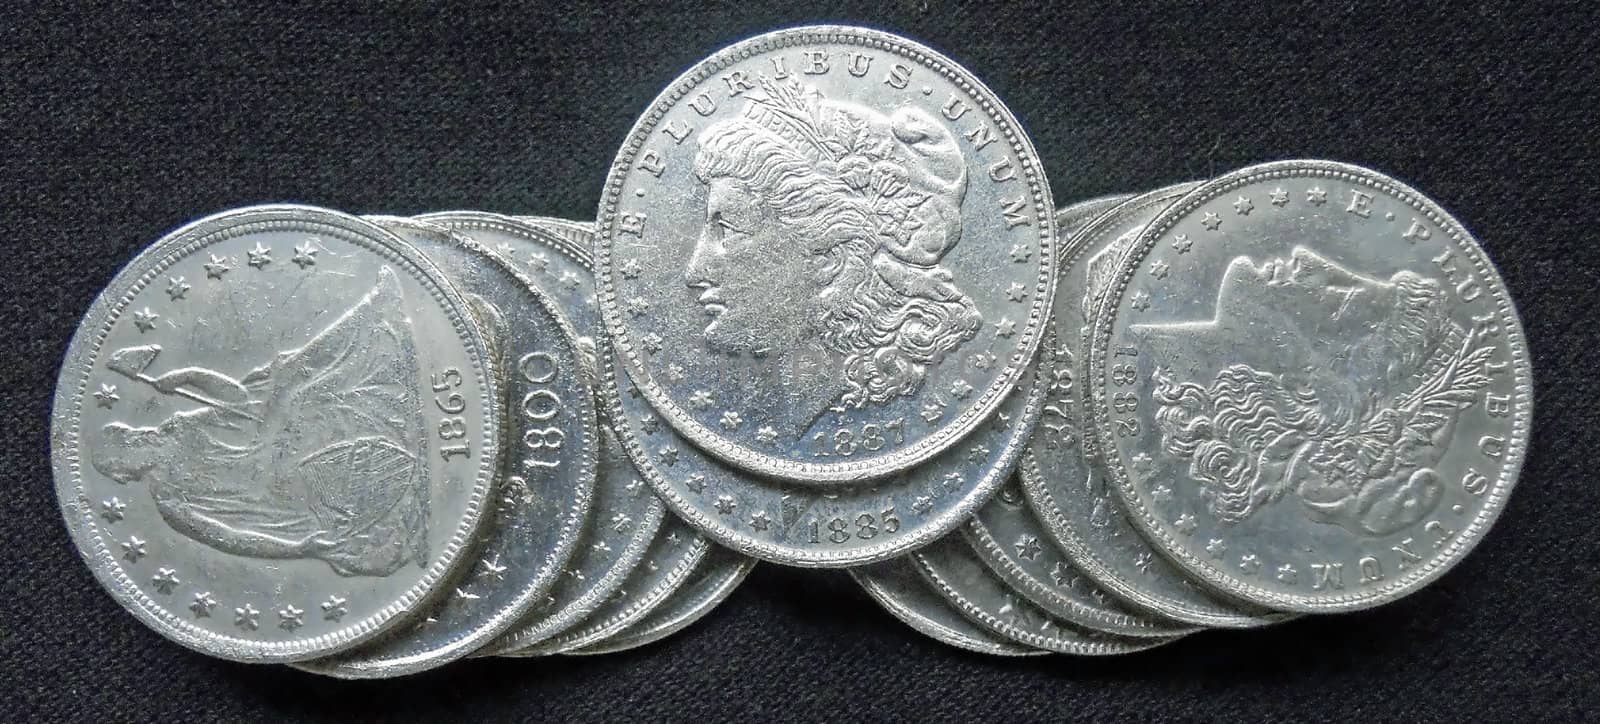   silver coins from 1800's all in excellent condition        